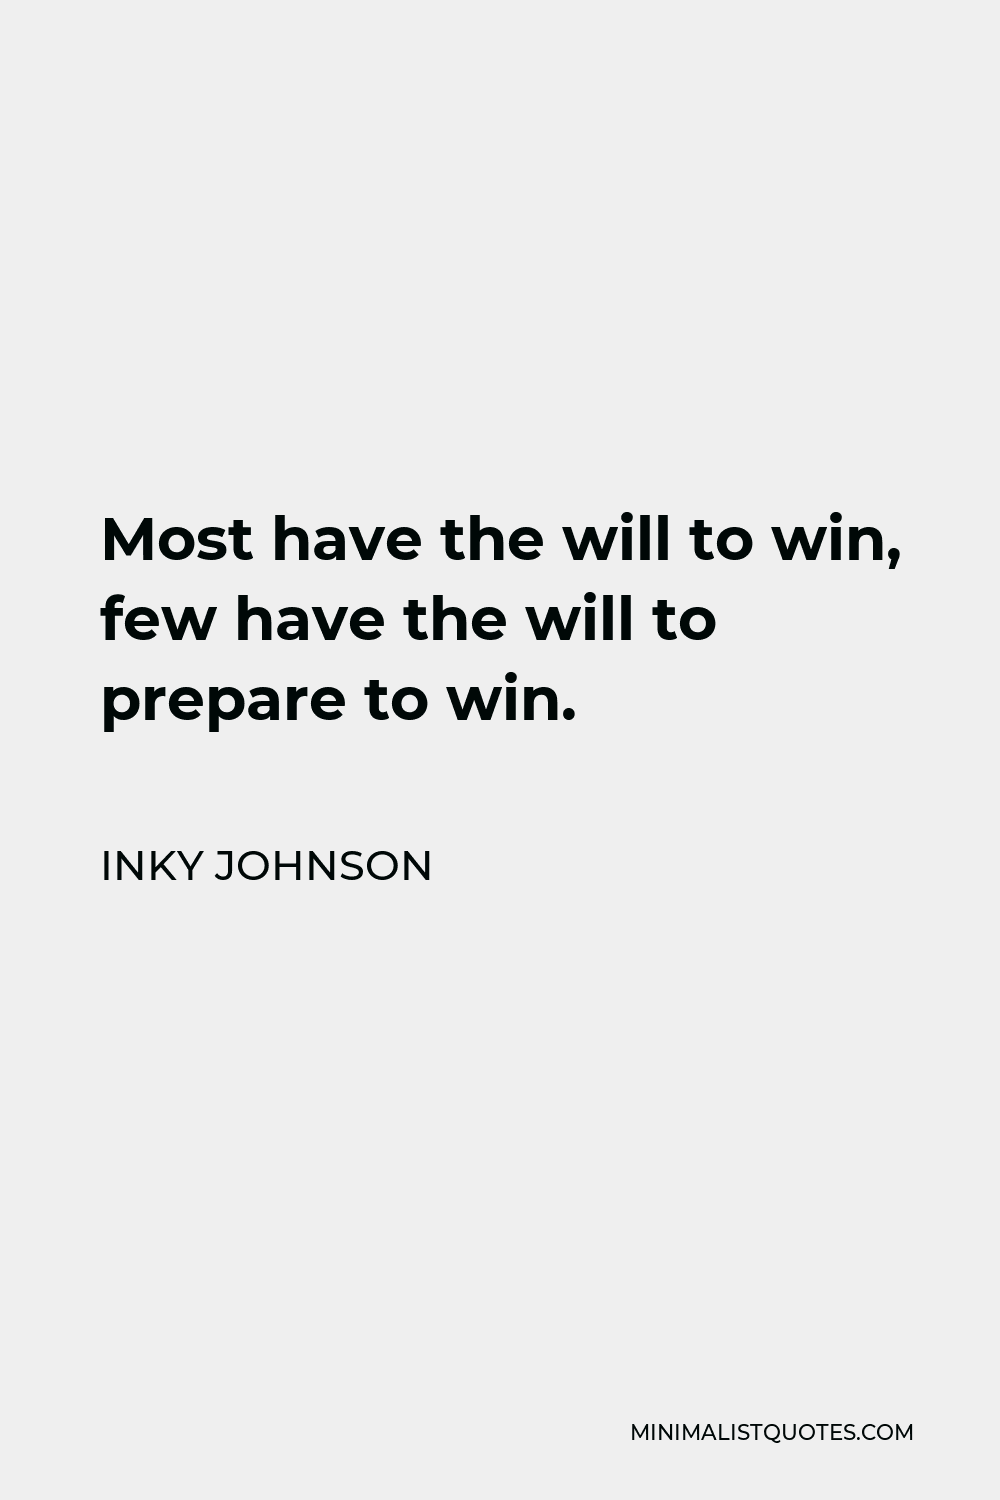 Inky Johnson Quote - Most have the will to win, few have the will to prepare to win.